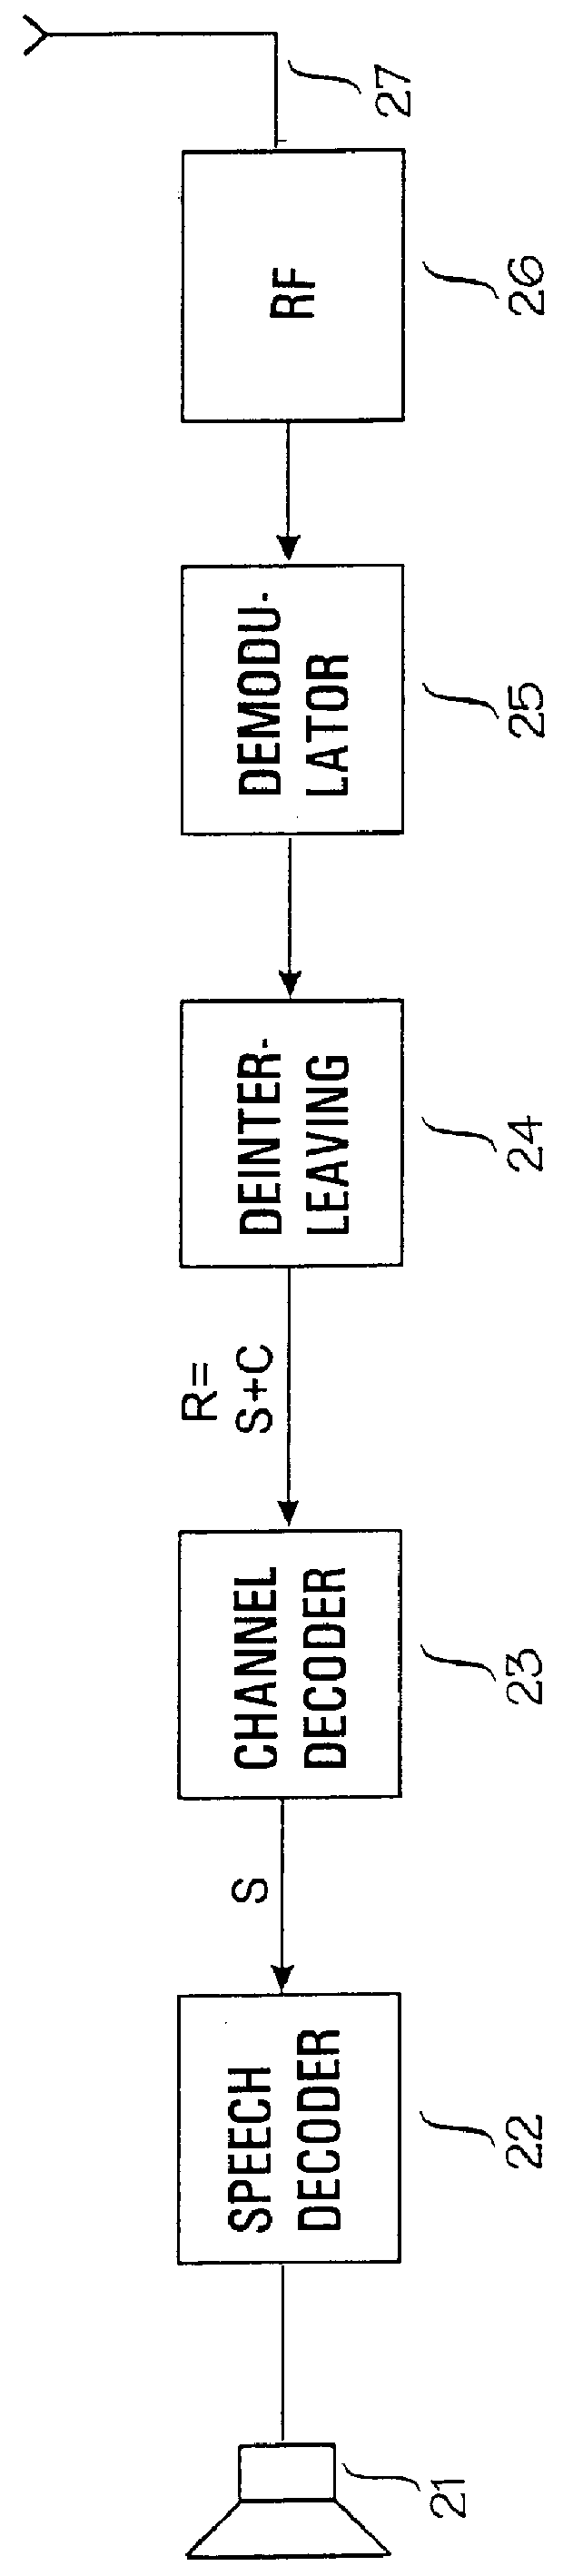 Variable rate circuit-switched transmission services in cellular radio systems